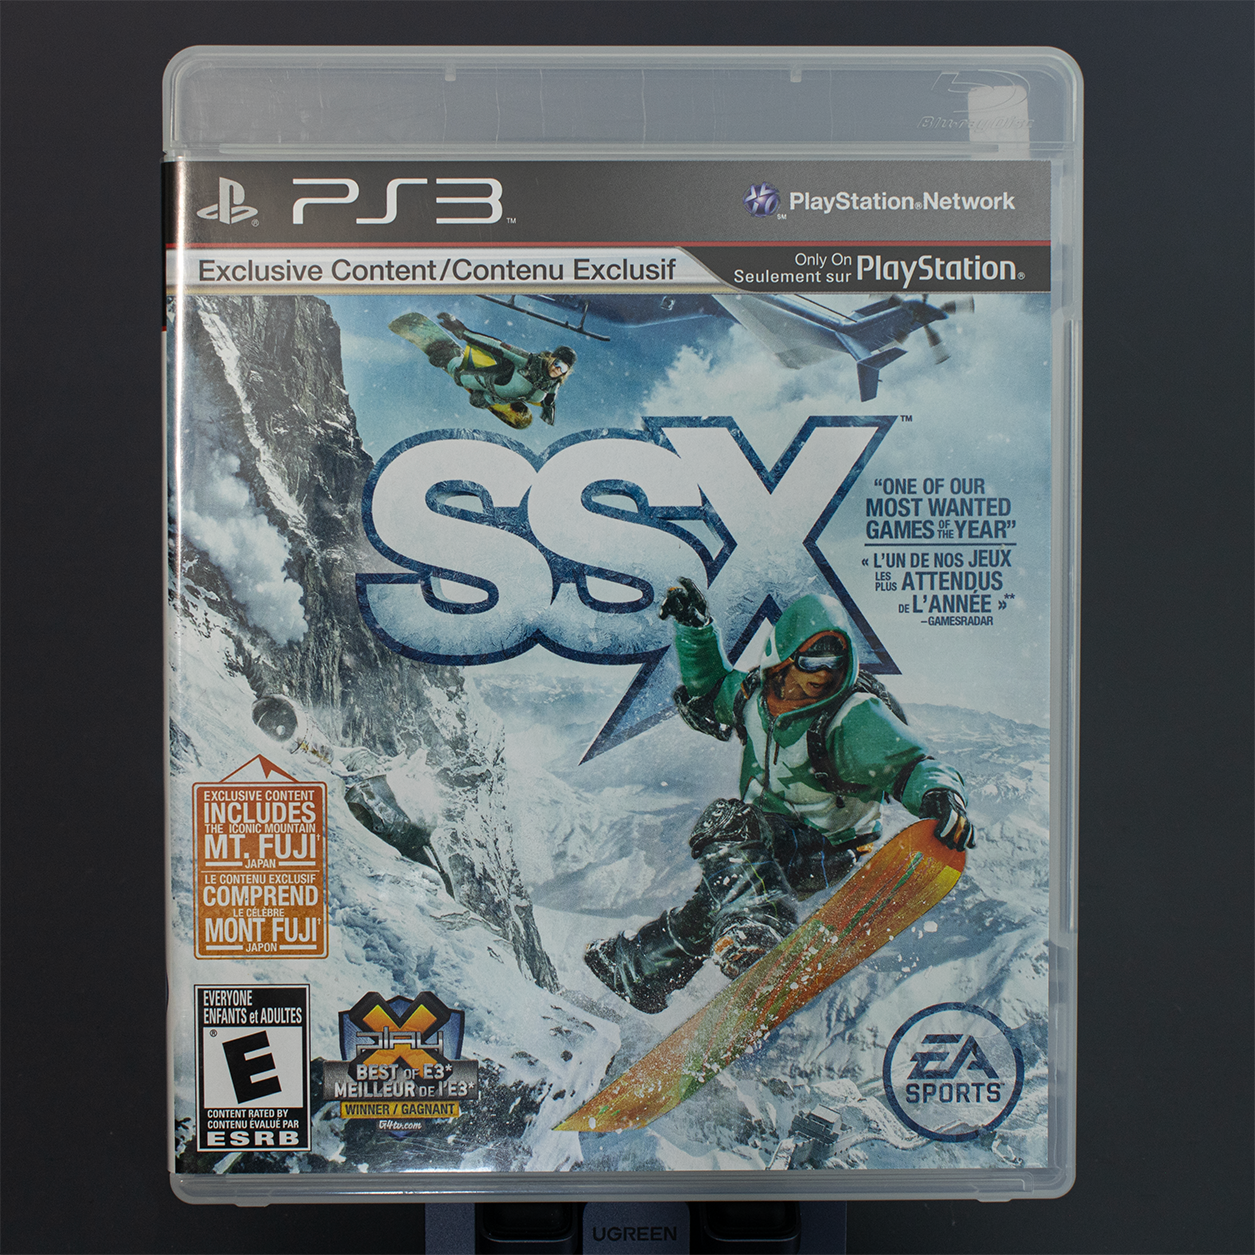 SSX - PS3 Game